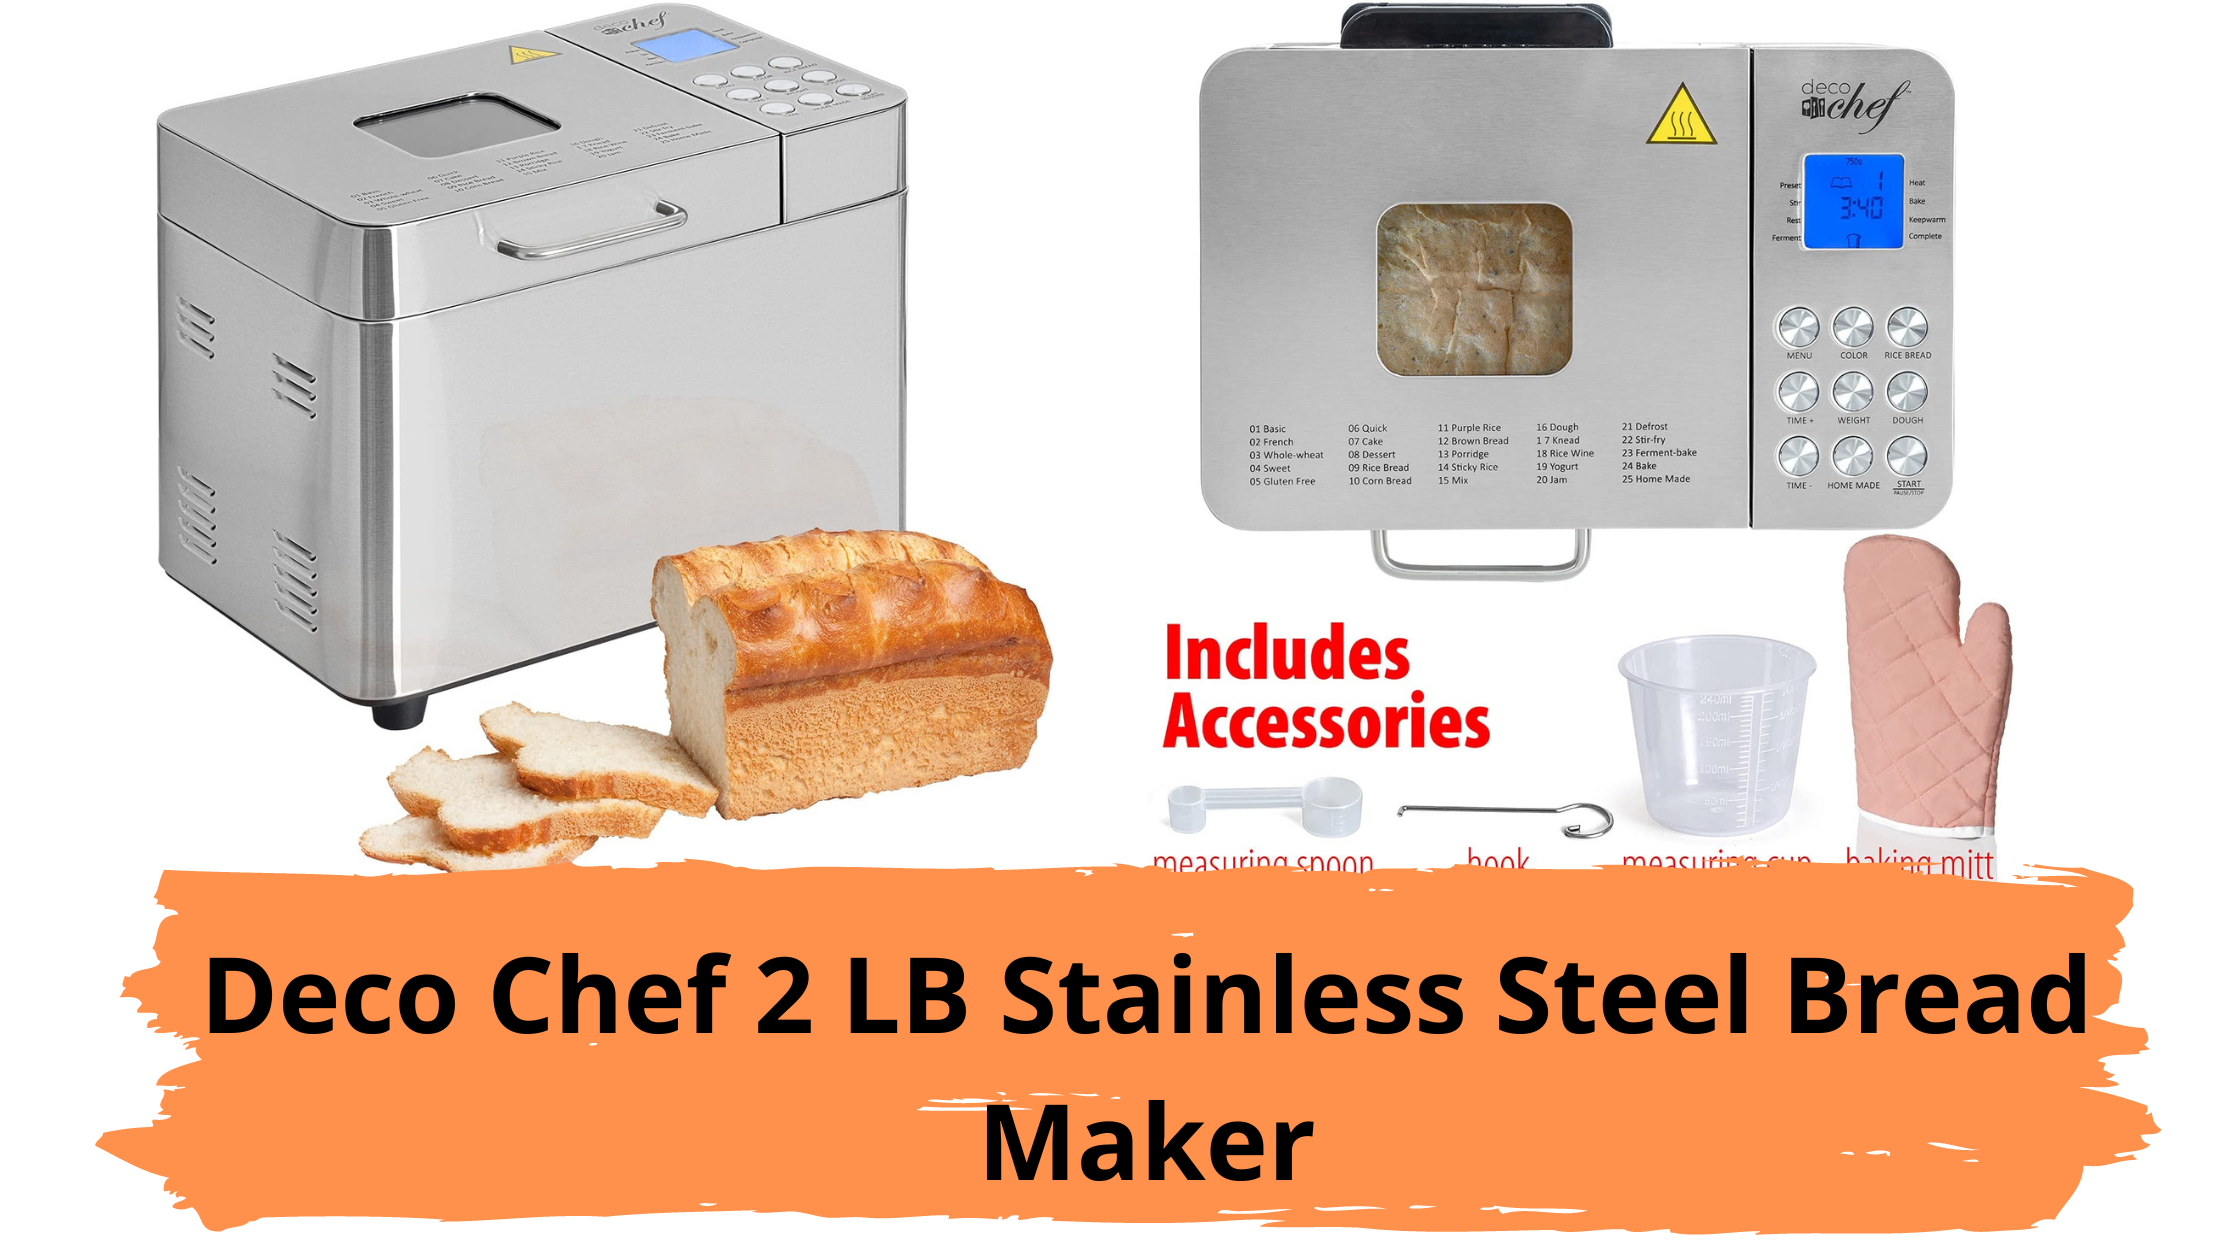 Deco Chef 2 LB Stainless Steel Bread Maker